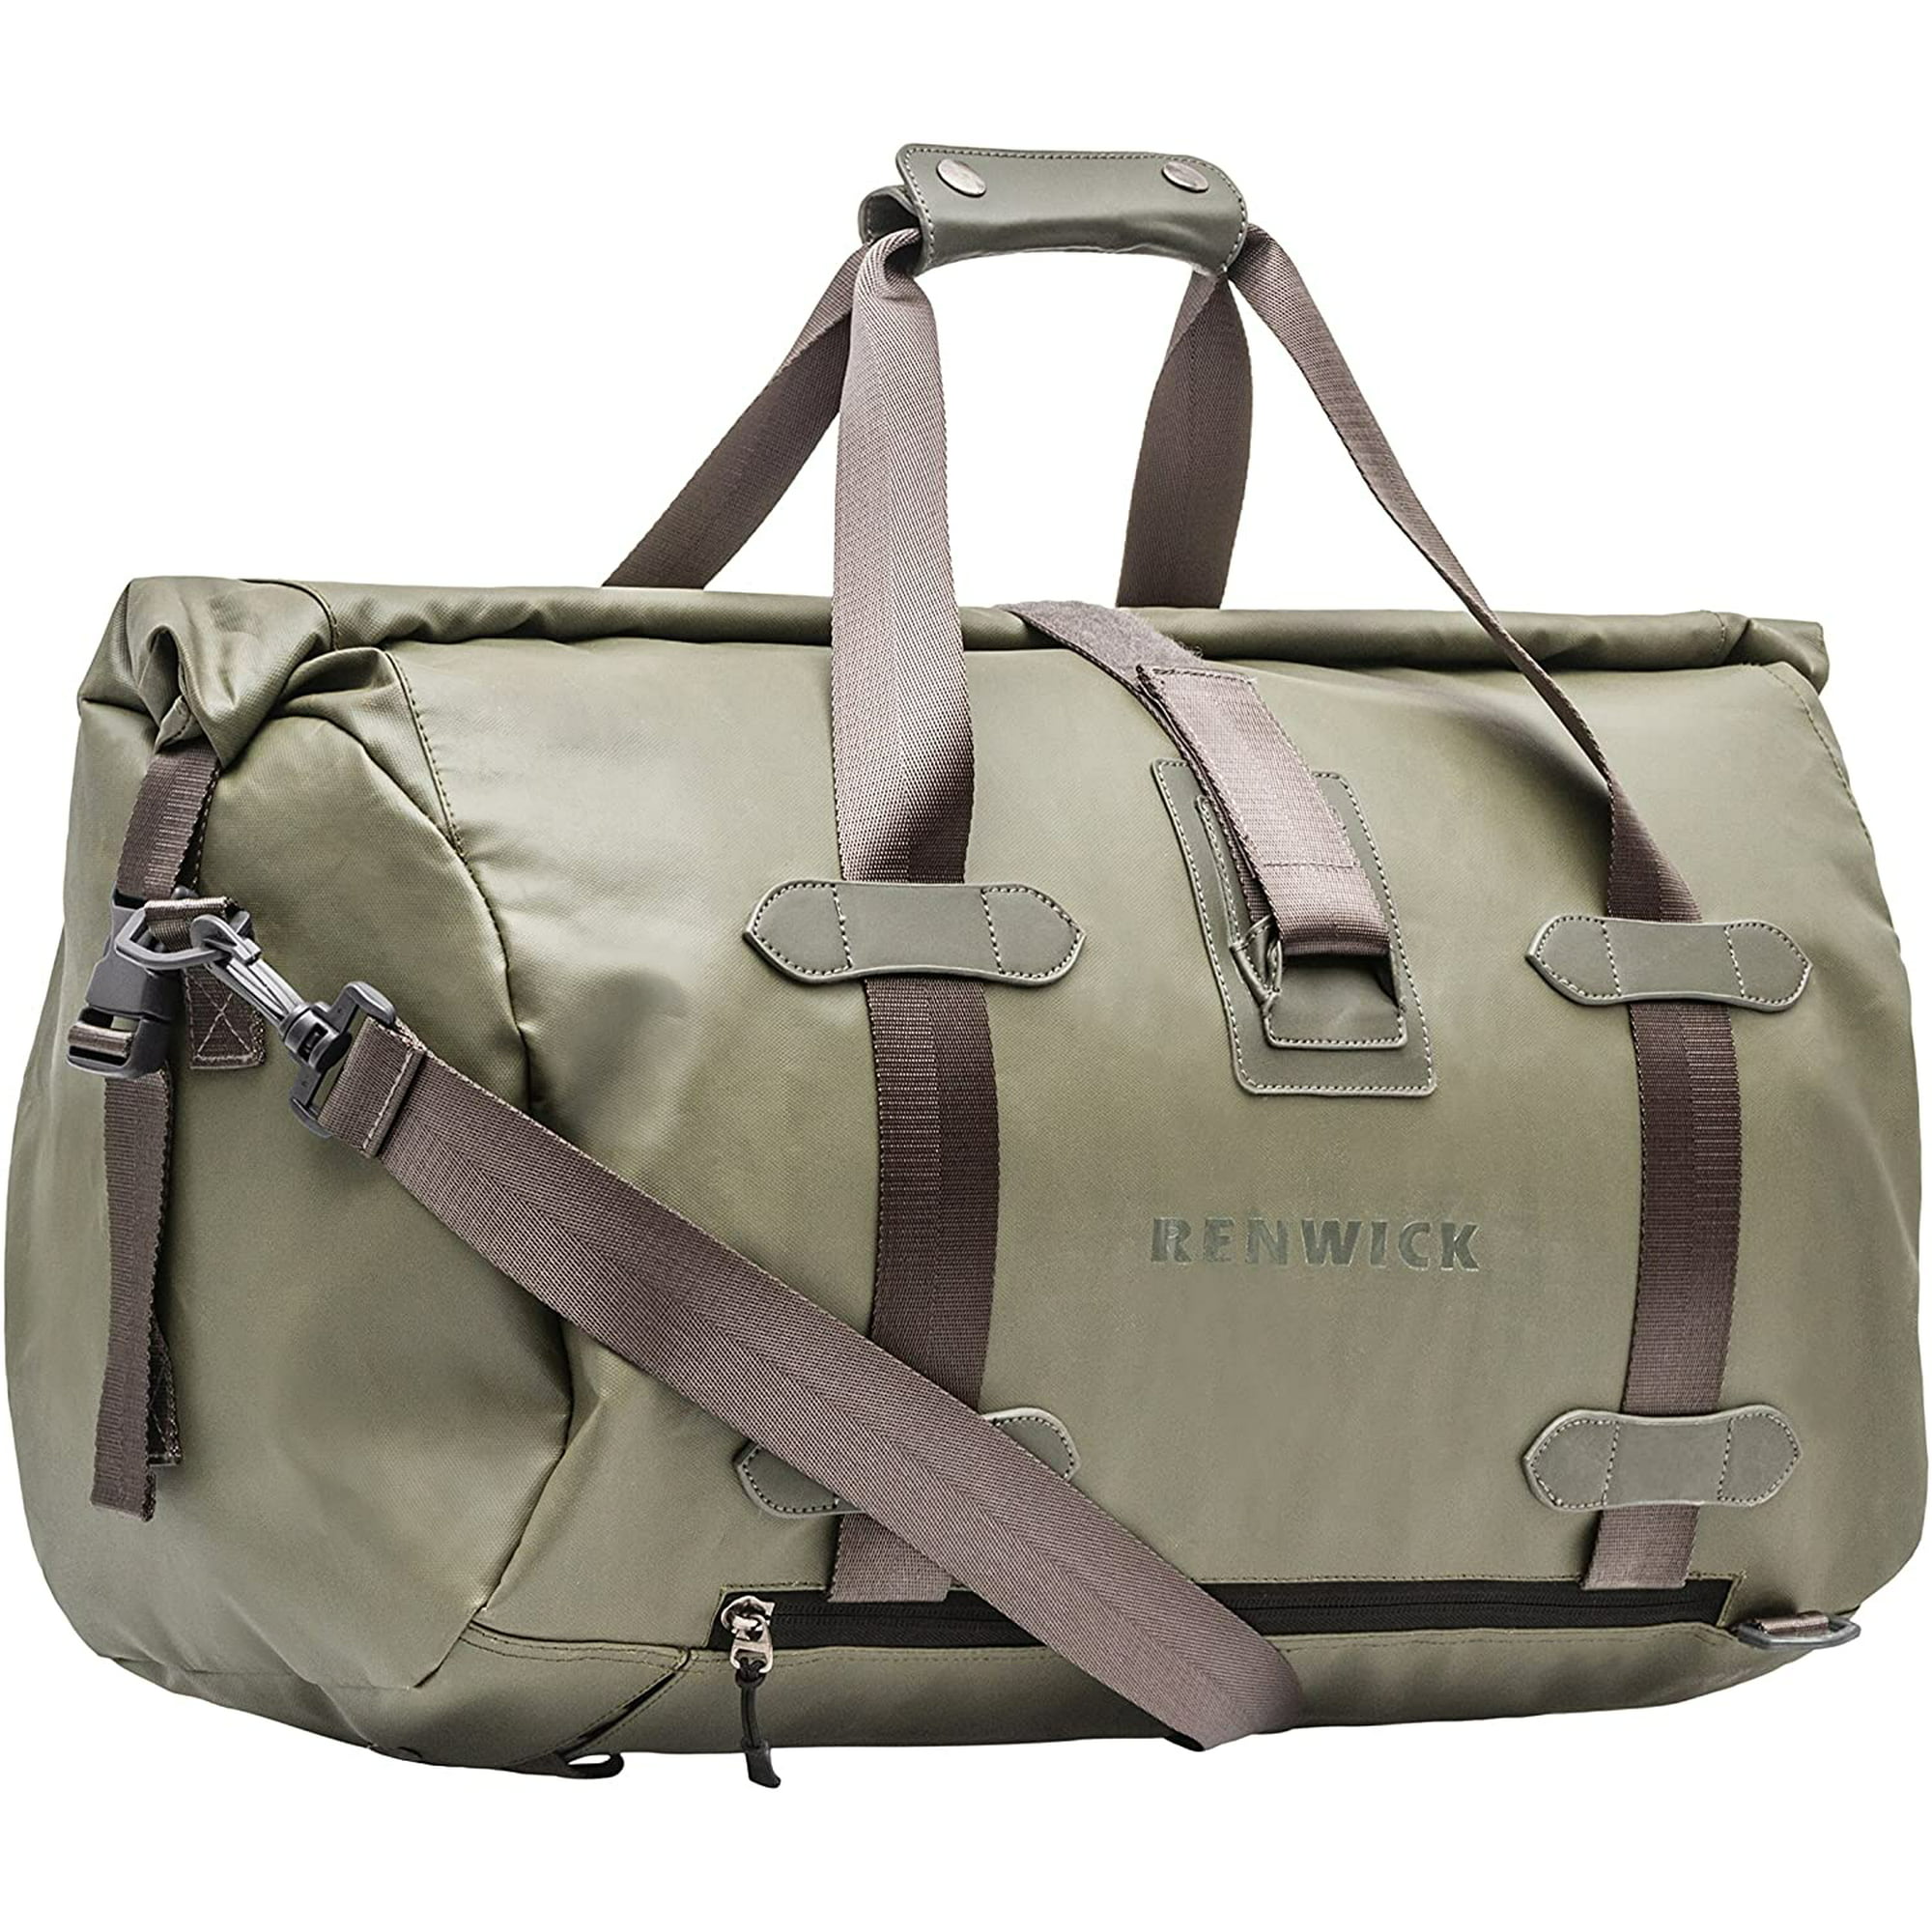 7 Hybrid Duffel Backpacks That Will Change The Way You Pack